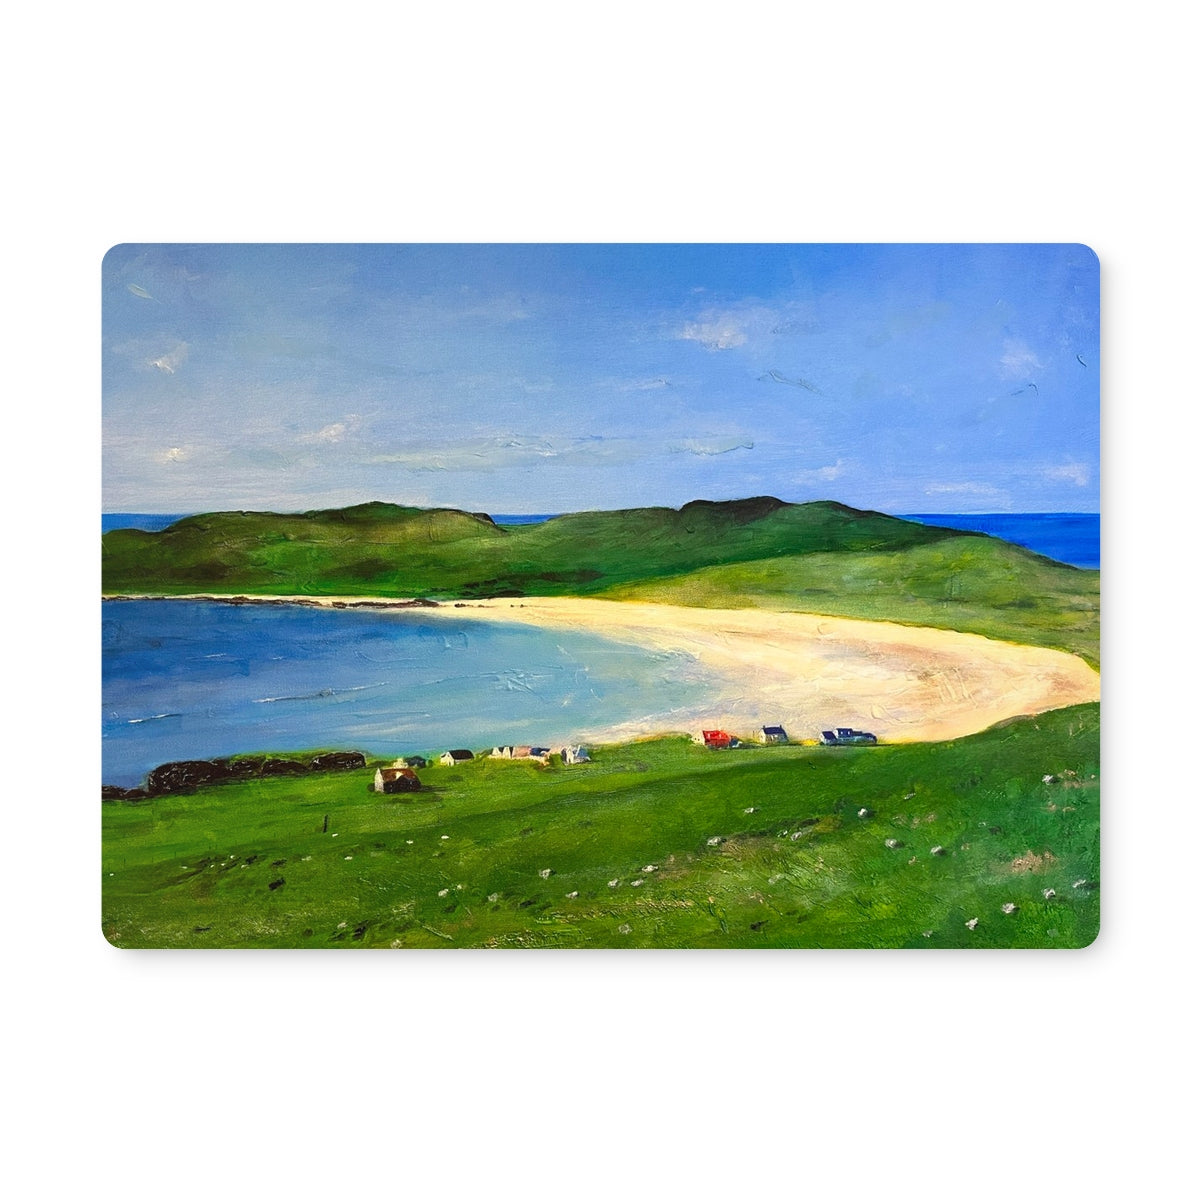 Balephuil Beach Tiree Art Gifts Placemat-Placemats-Hebridean Islands Art Gallery-2 Placemats-Paintings, Prints, Homeware, Art Gifts From Scotland By Scottish Artist Kevin Hunter